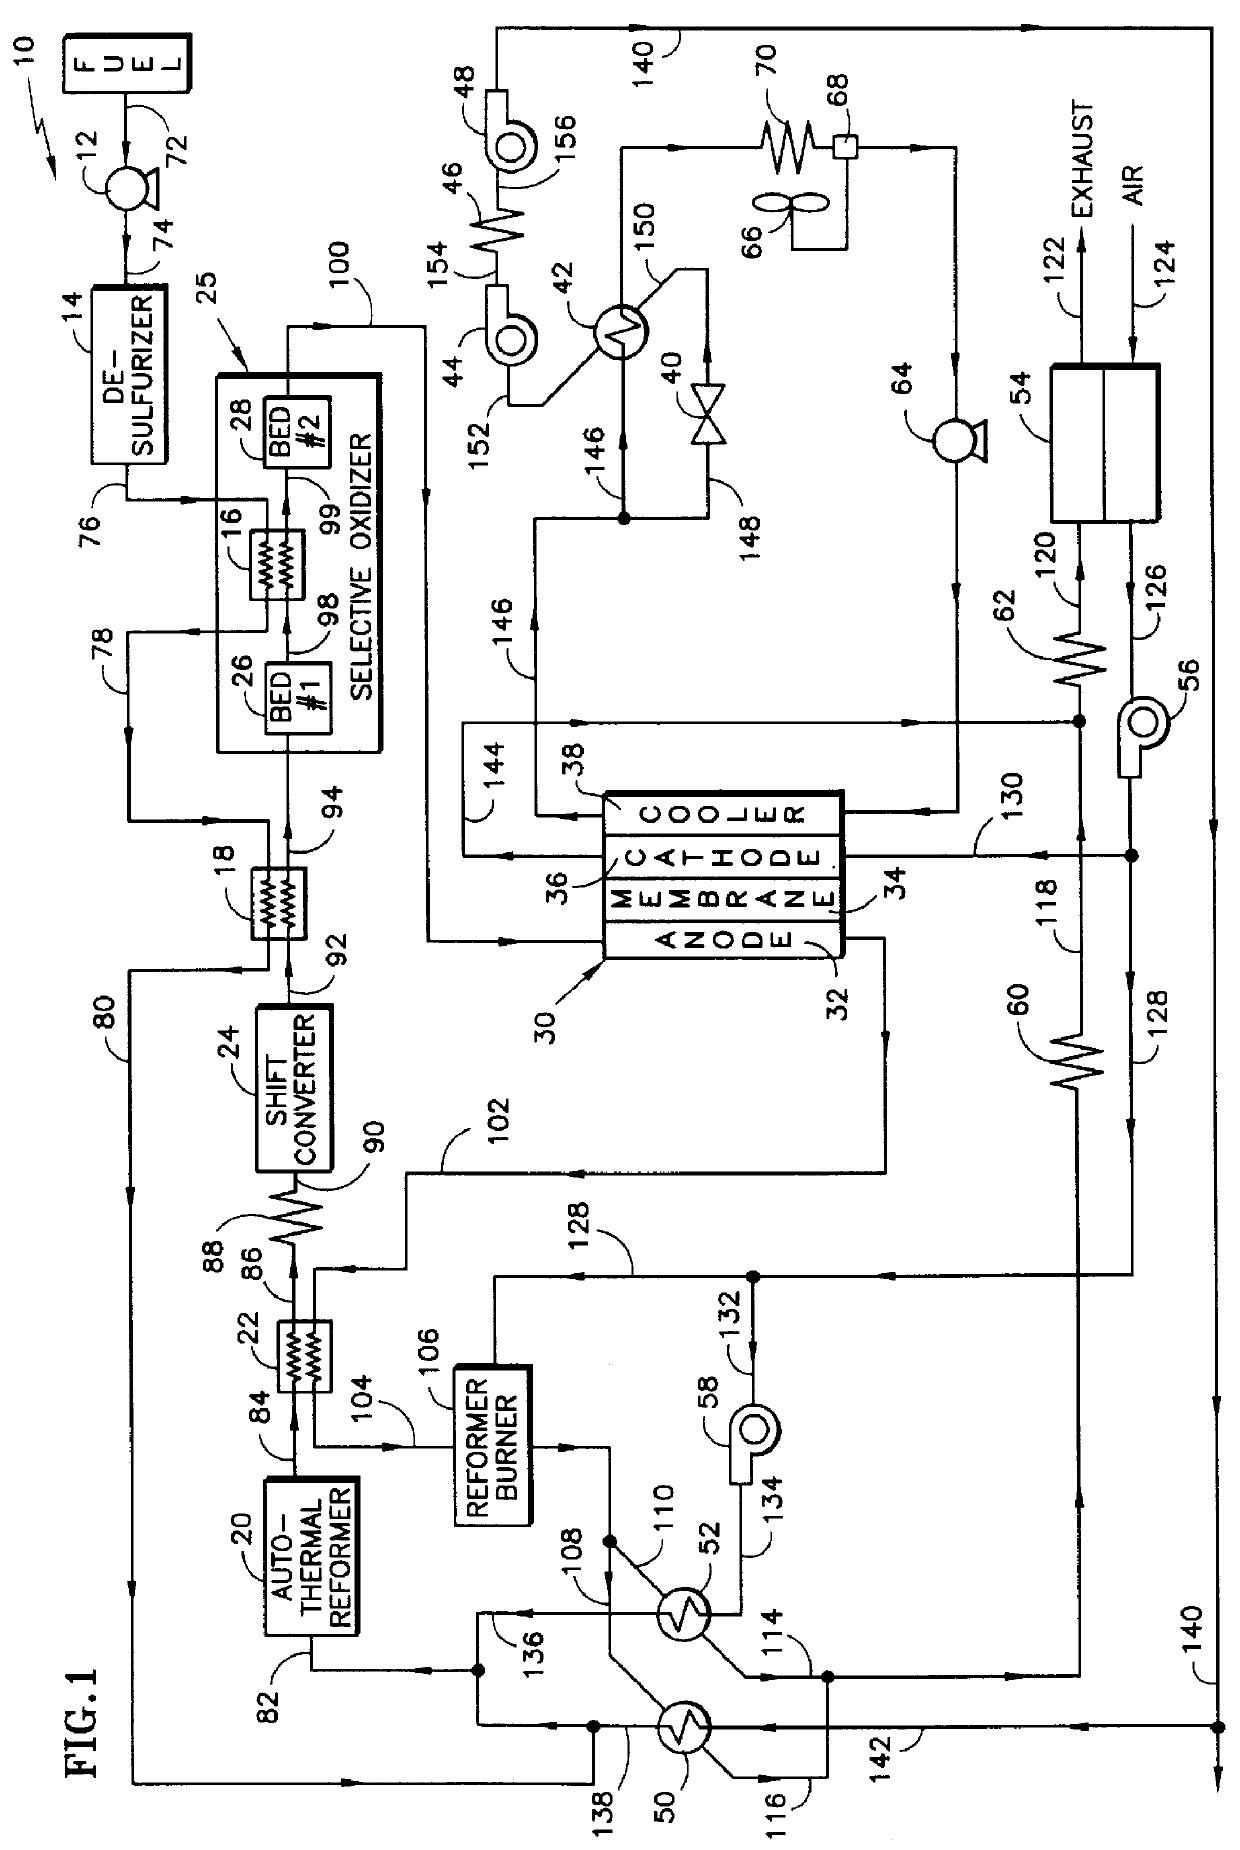 Steam producing hydrocarbon fueled power plant employing a PEM fuel cell